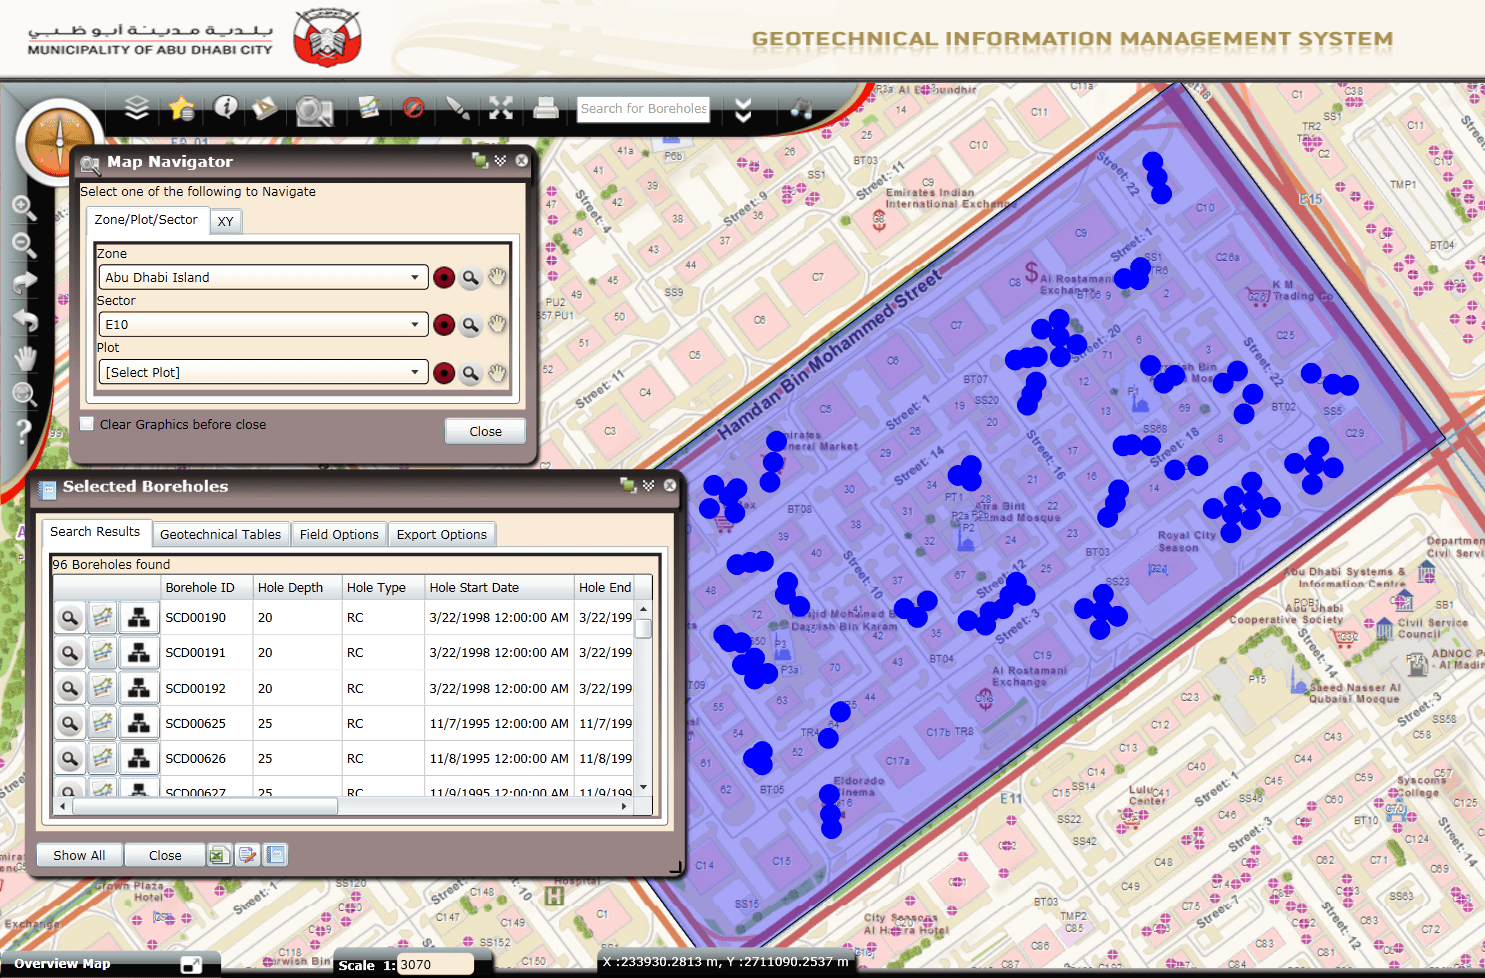 Users can query boreholes based on zones and spatial locations.